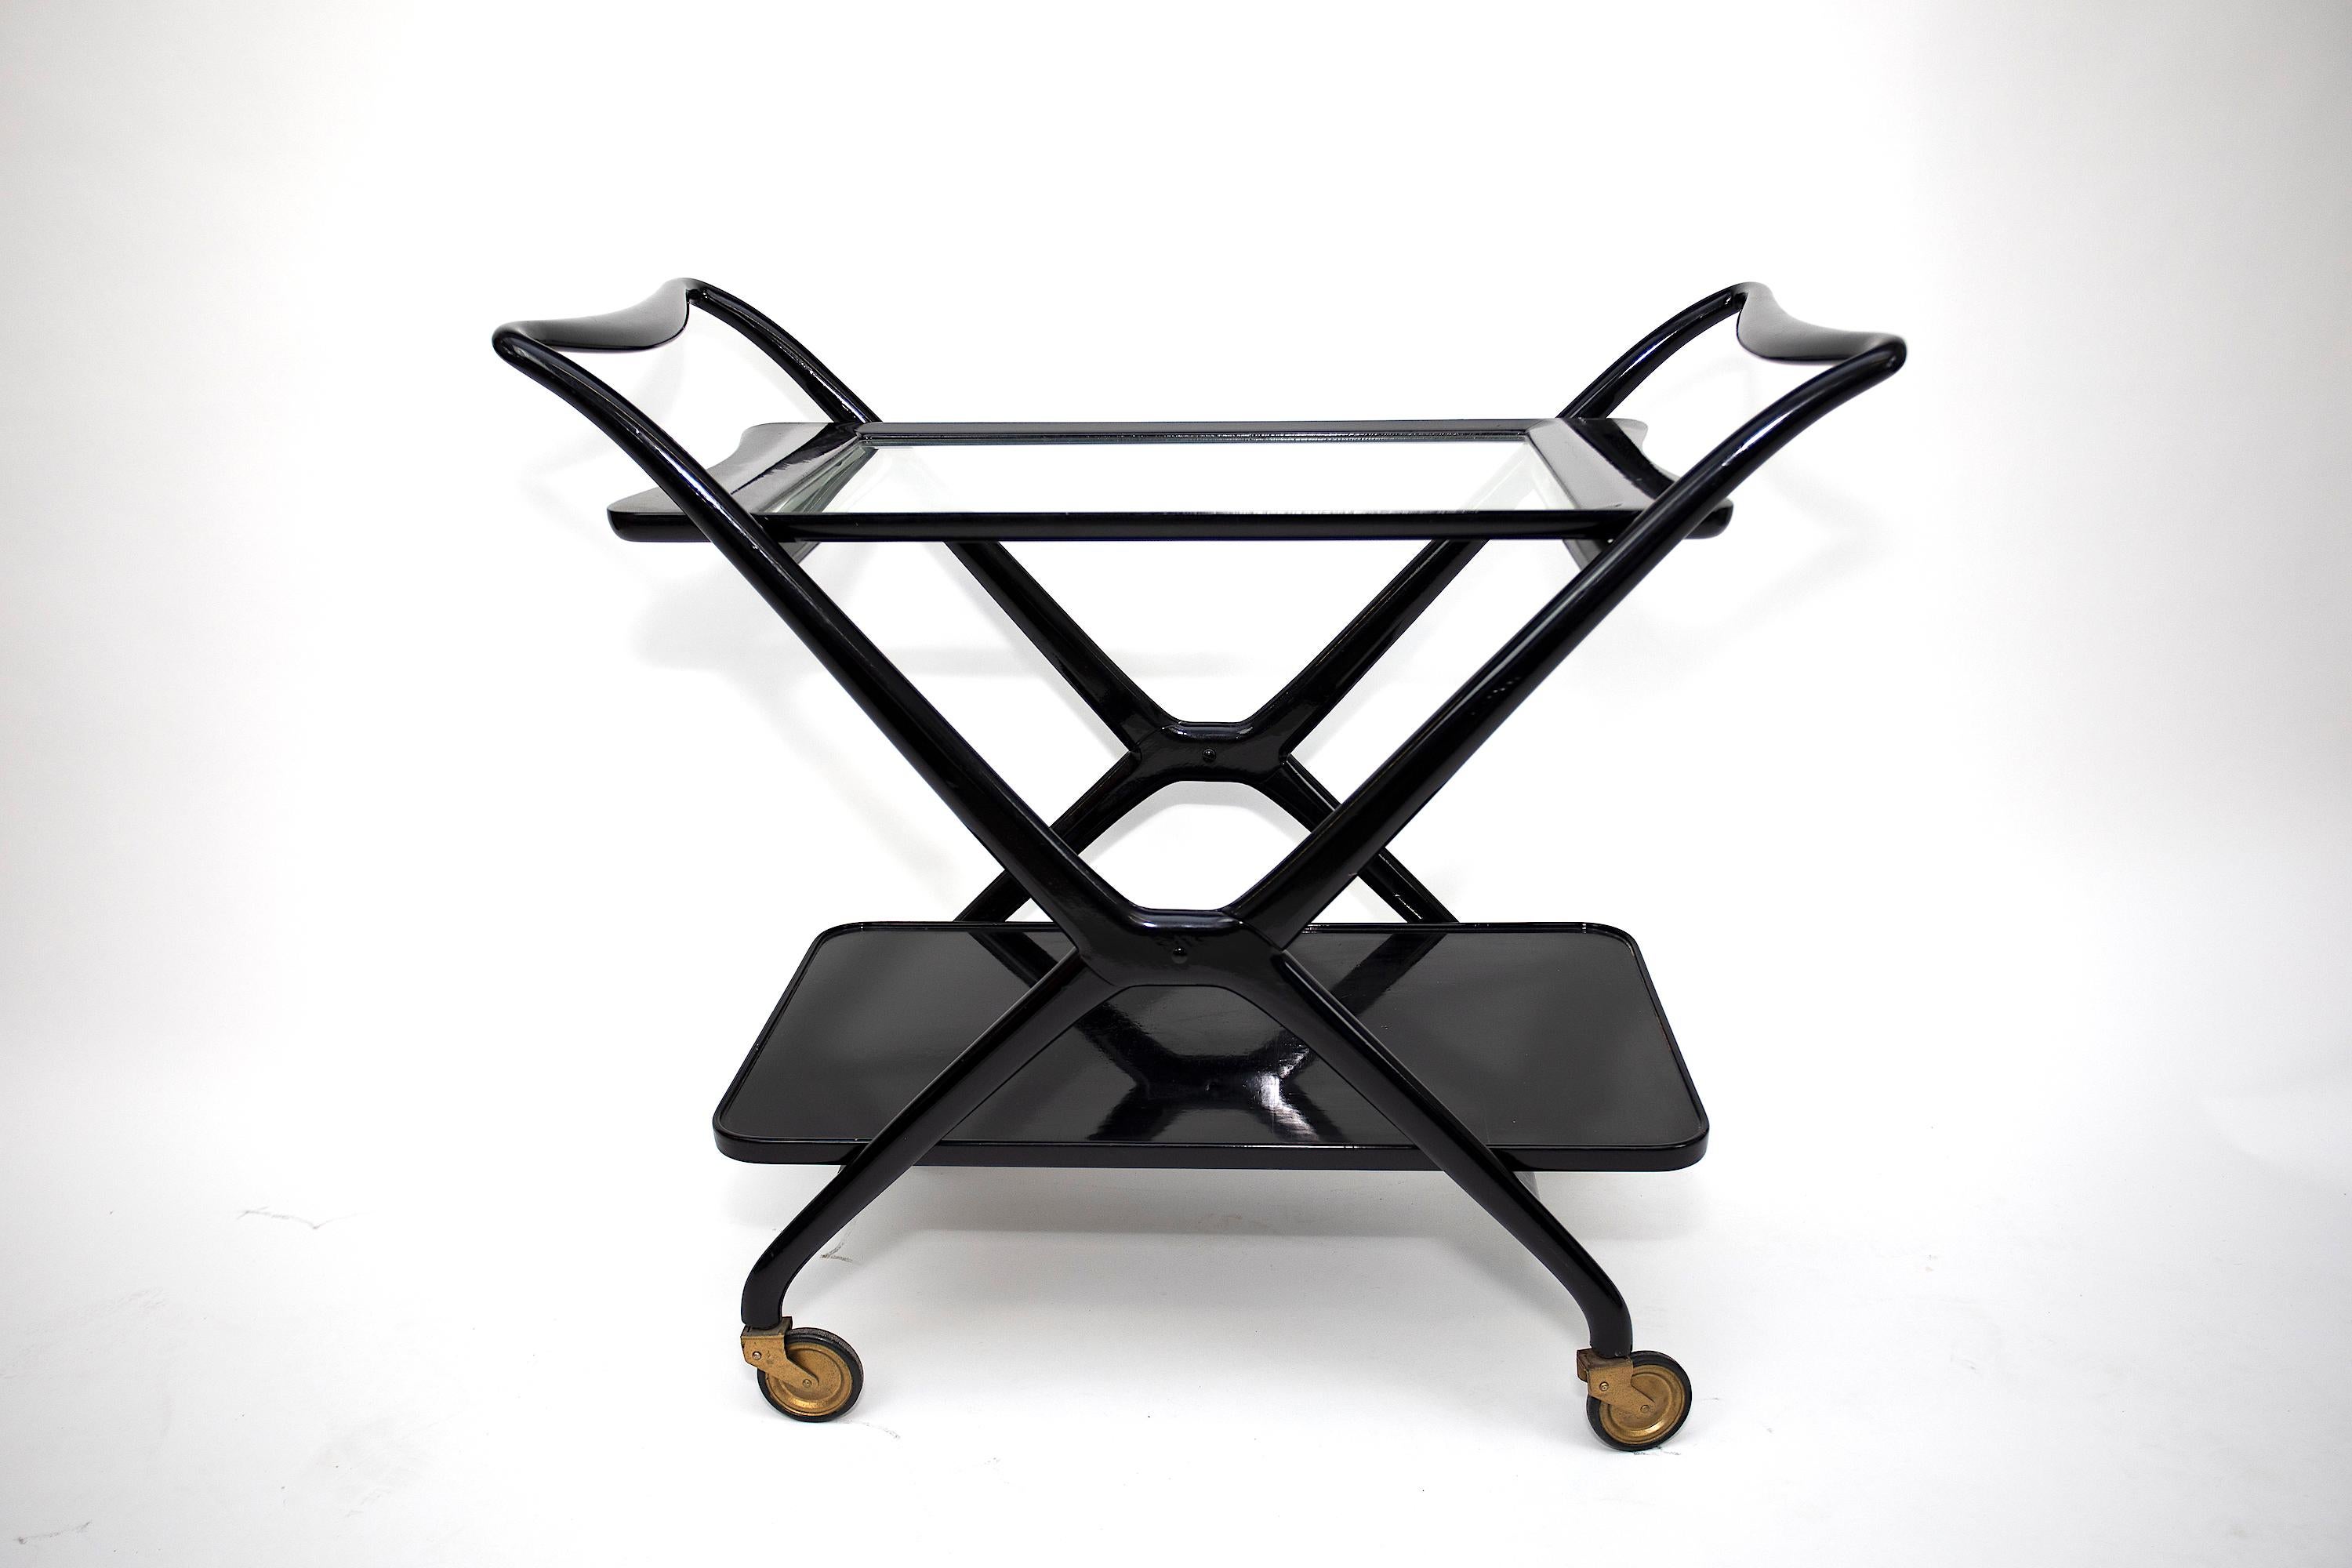 Cesarre Lacca serving cart
Original Dark Lacquer Finish
Both bottom shelf and top glass shelf is removable
Cart folds flat for storage
Stamped MADE IN ITALY.